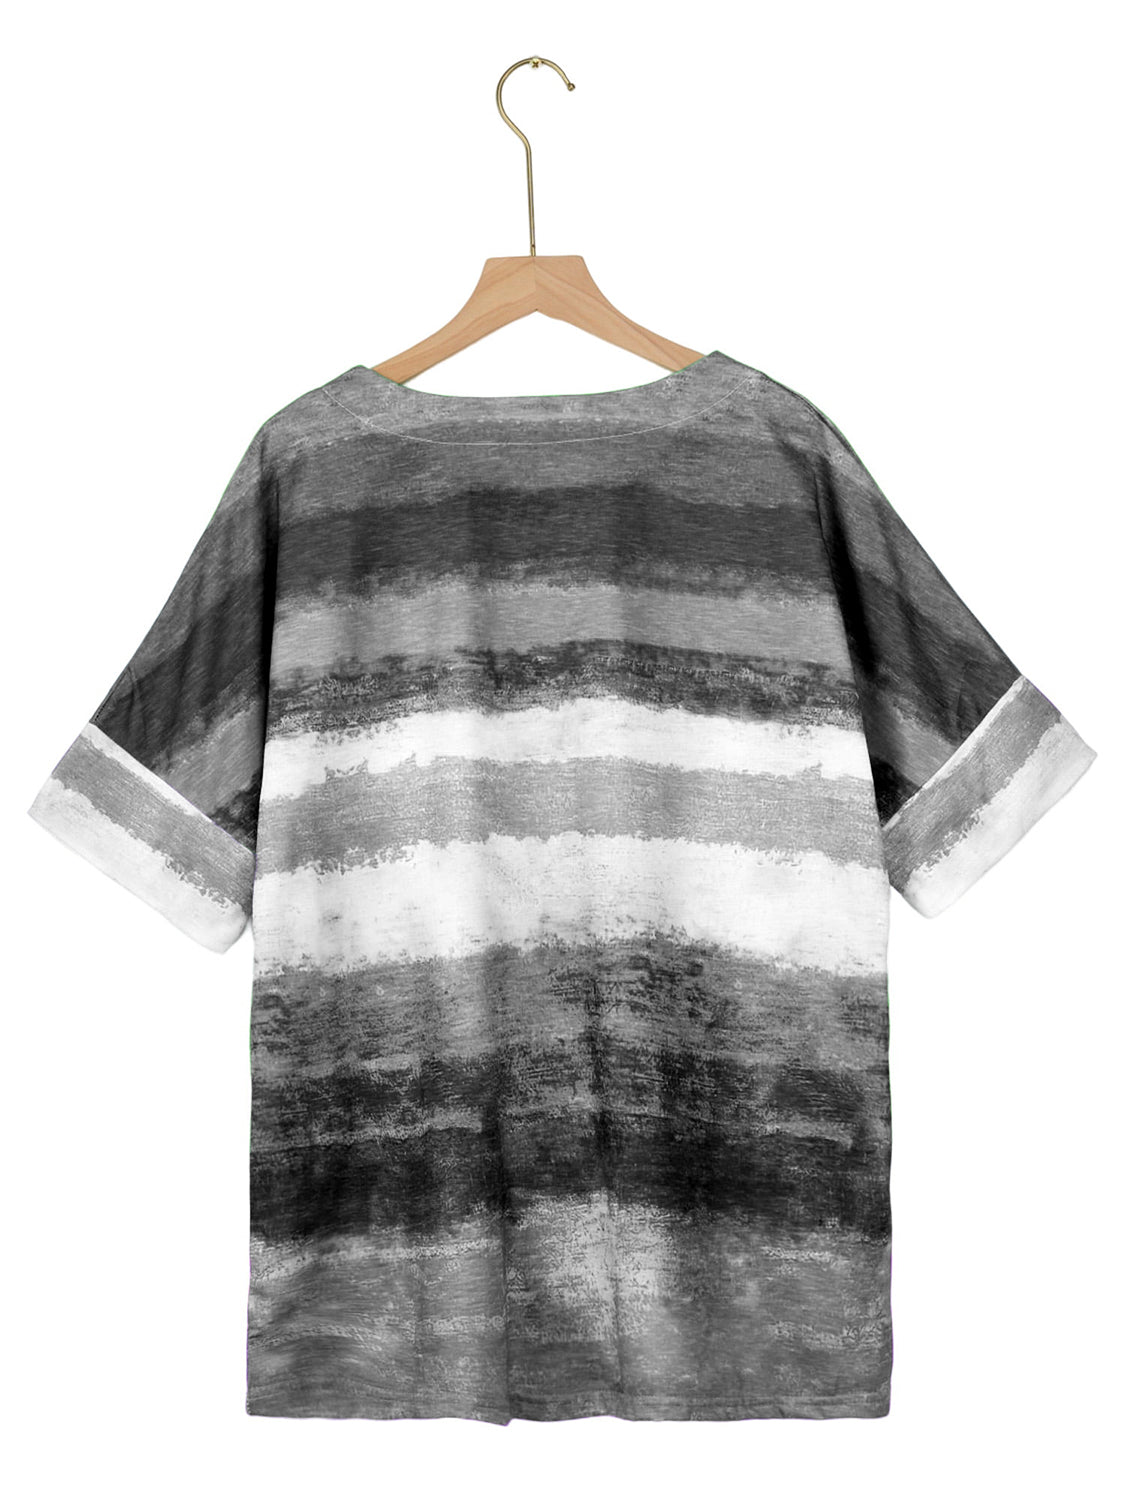 PREORDER- Full Size Color Block Round Neck Half Sleeve T-Shirt